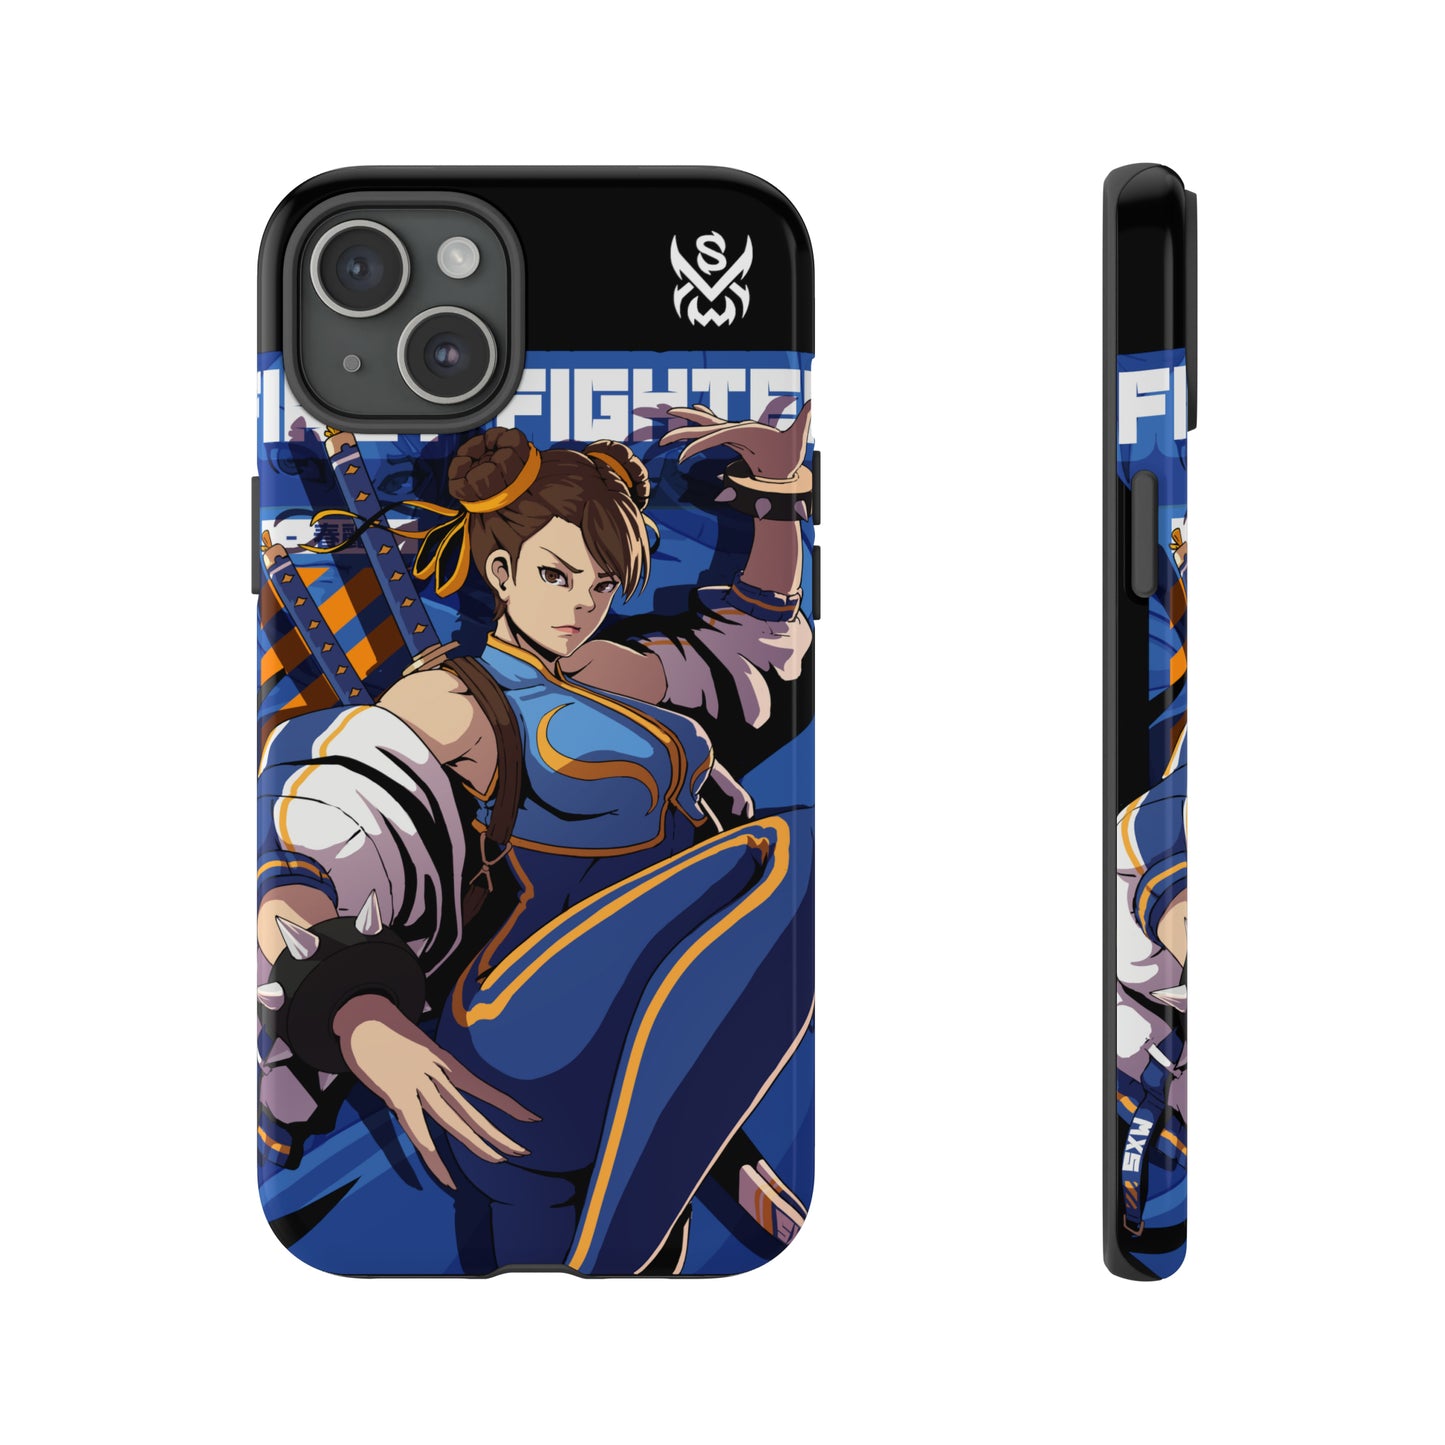 First Fighter / iPhone Case - LIMITED